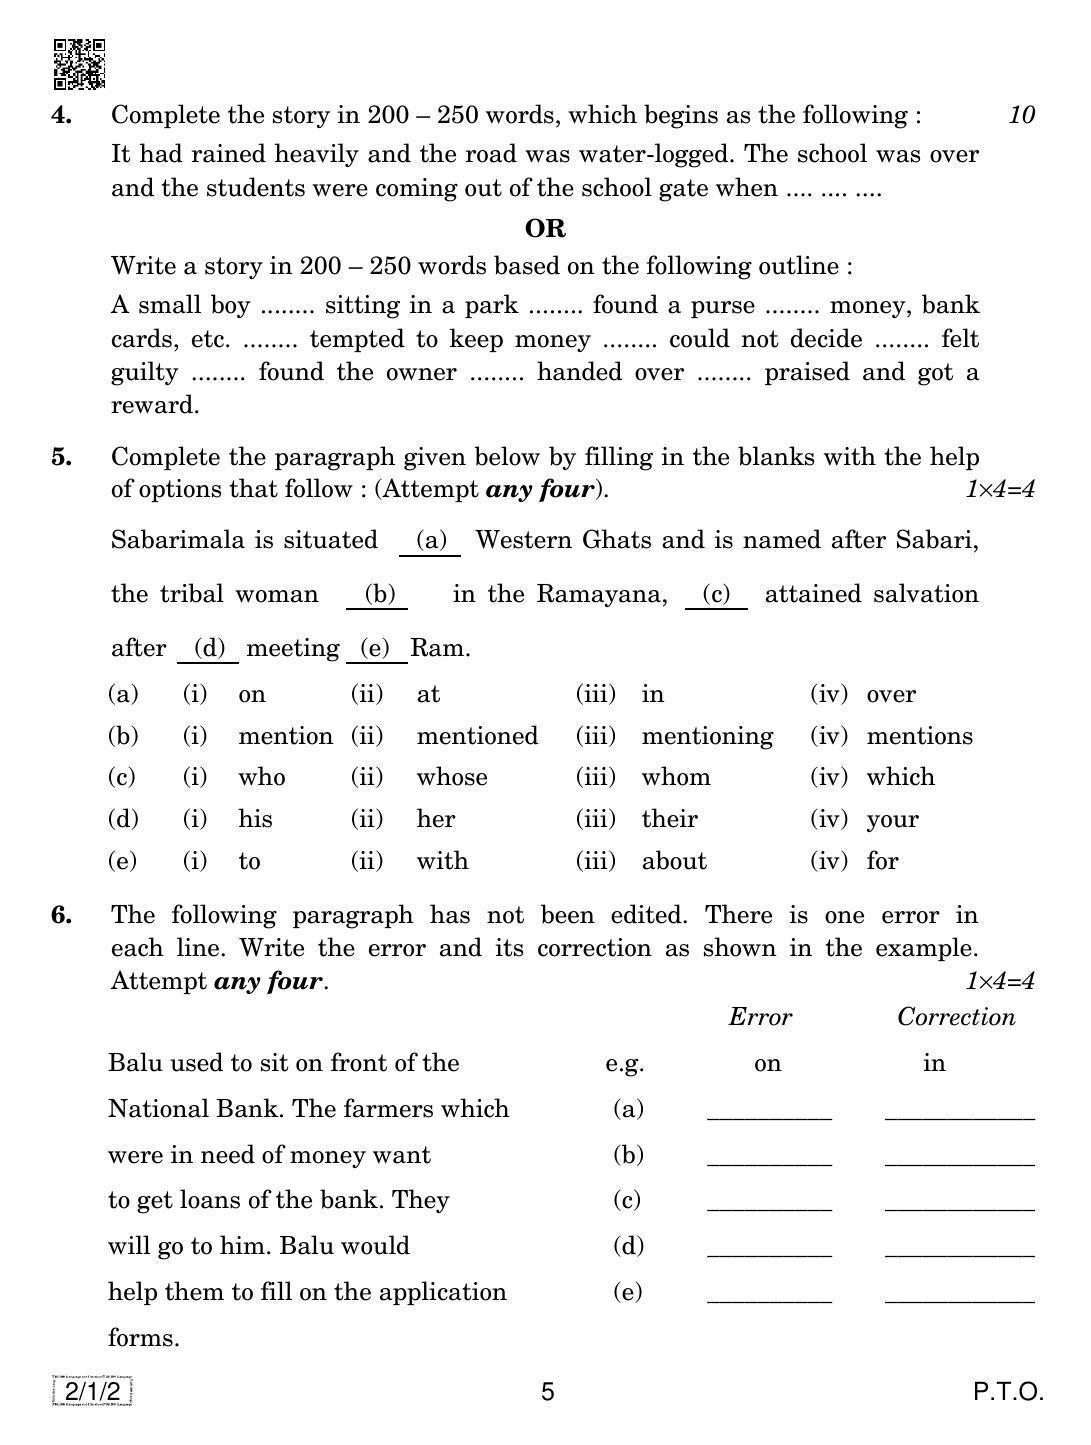 CBSE Class 10 2-1-2 ENGLISH LANG. & LIT. 2019 Compartment Question Paper - Page 5